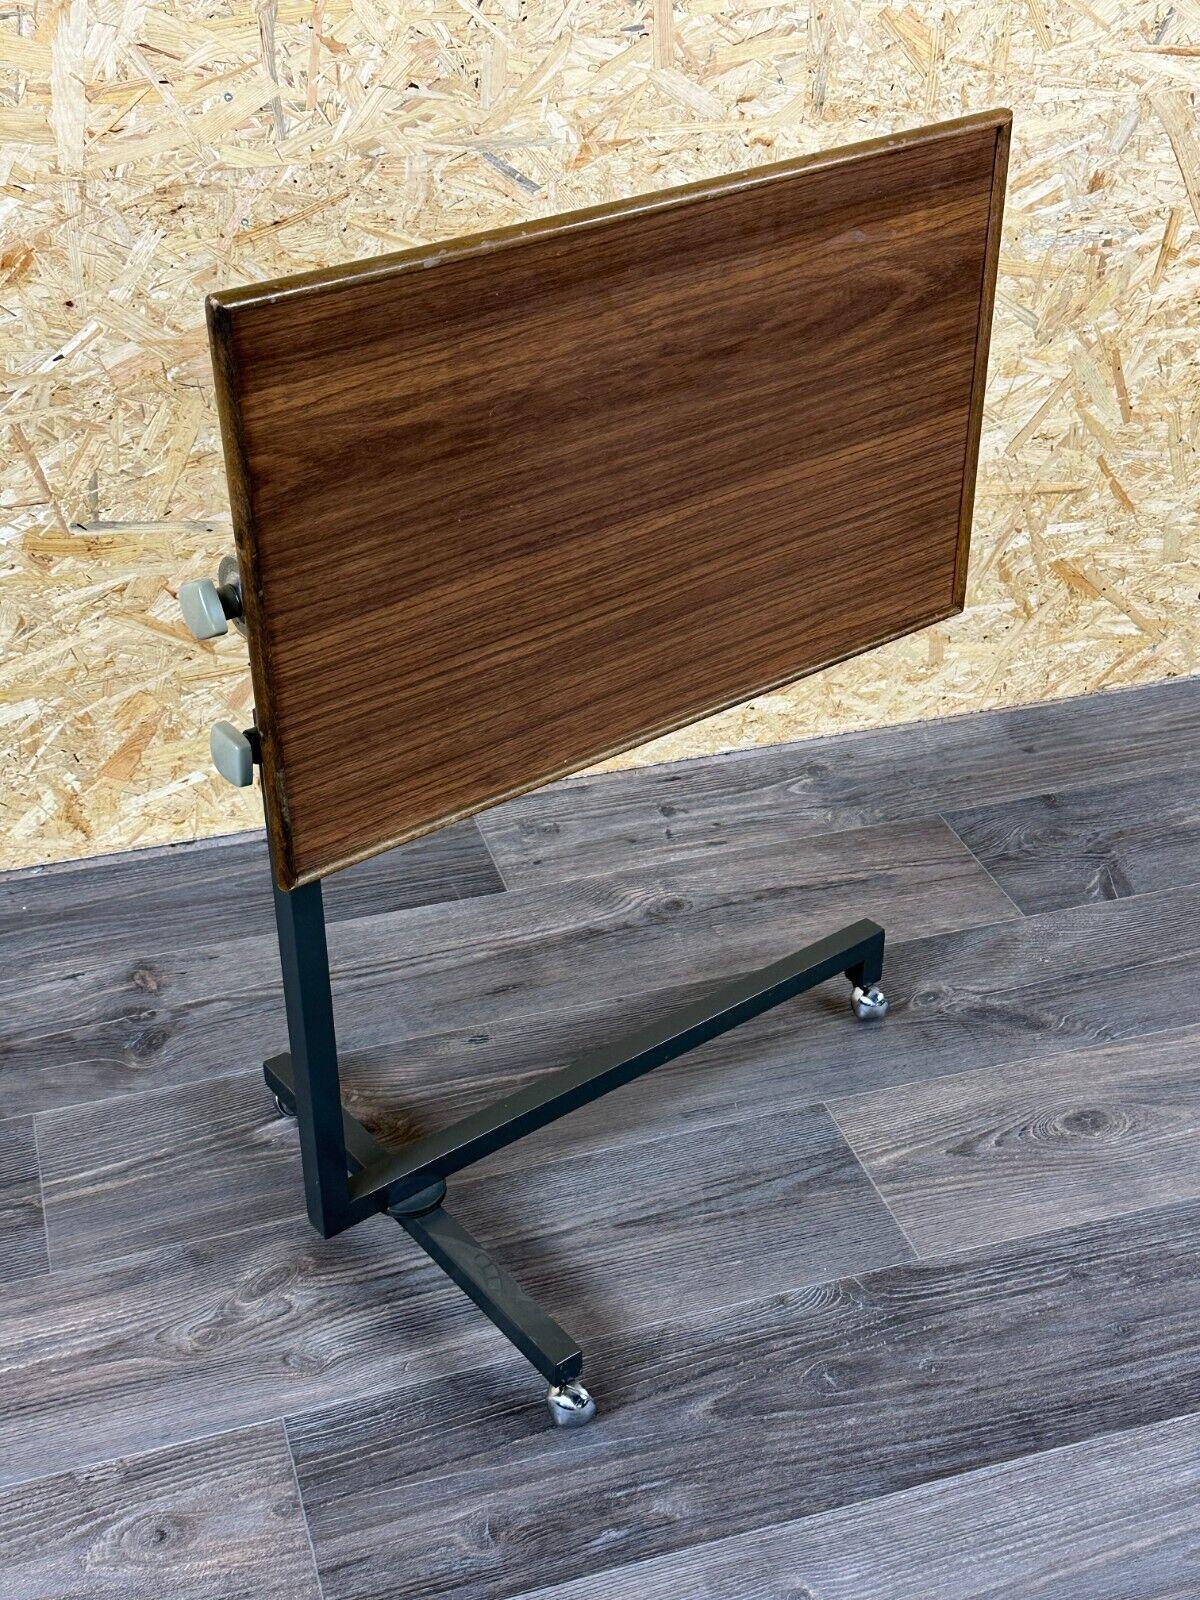 60s 70s serving trolley dinette side table space age brown design im Angebot 7